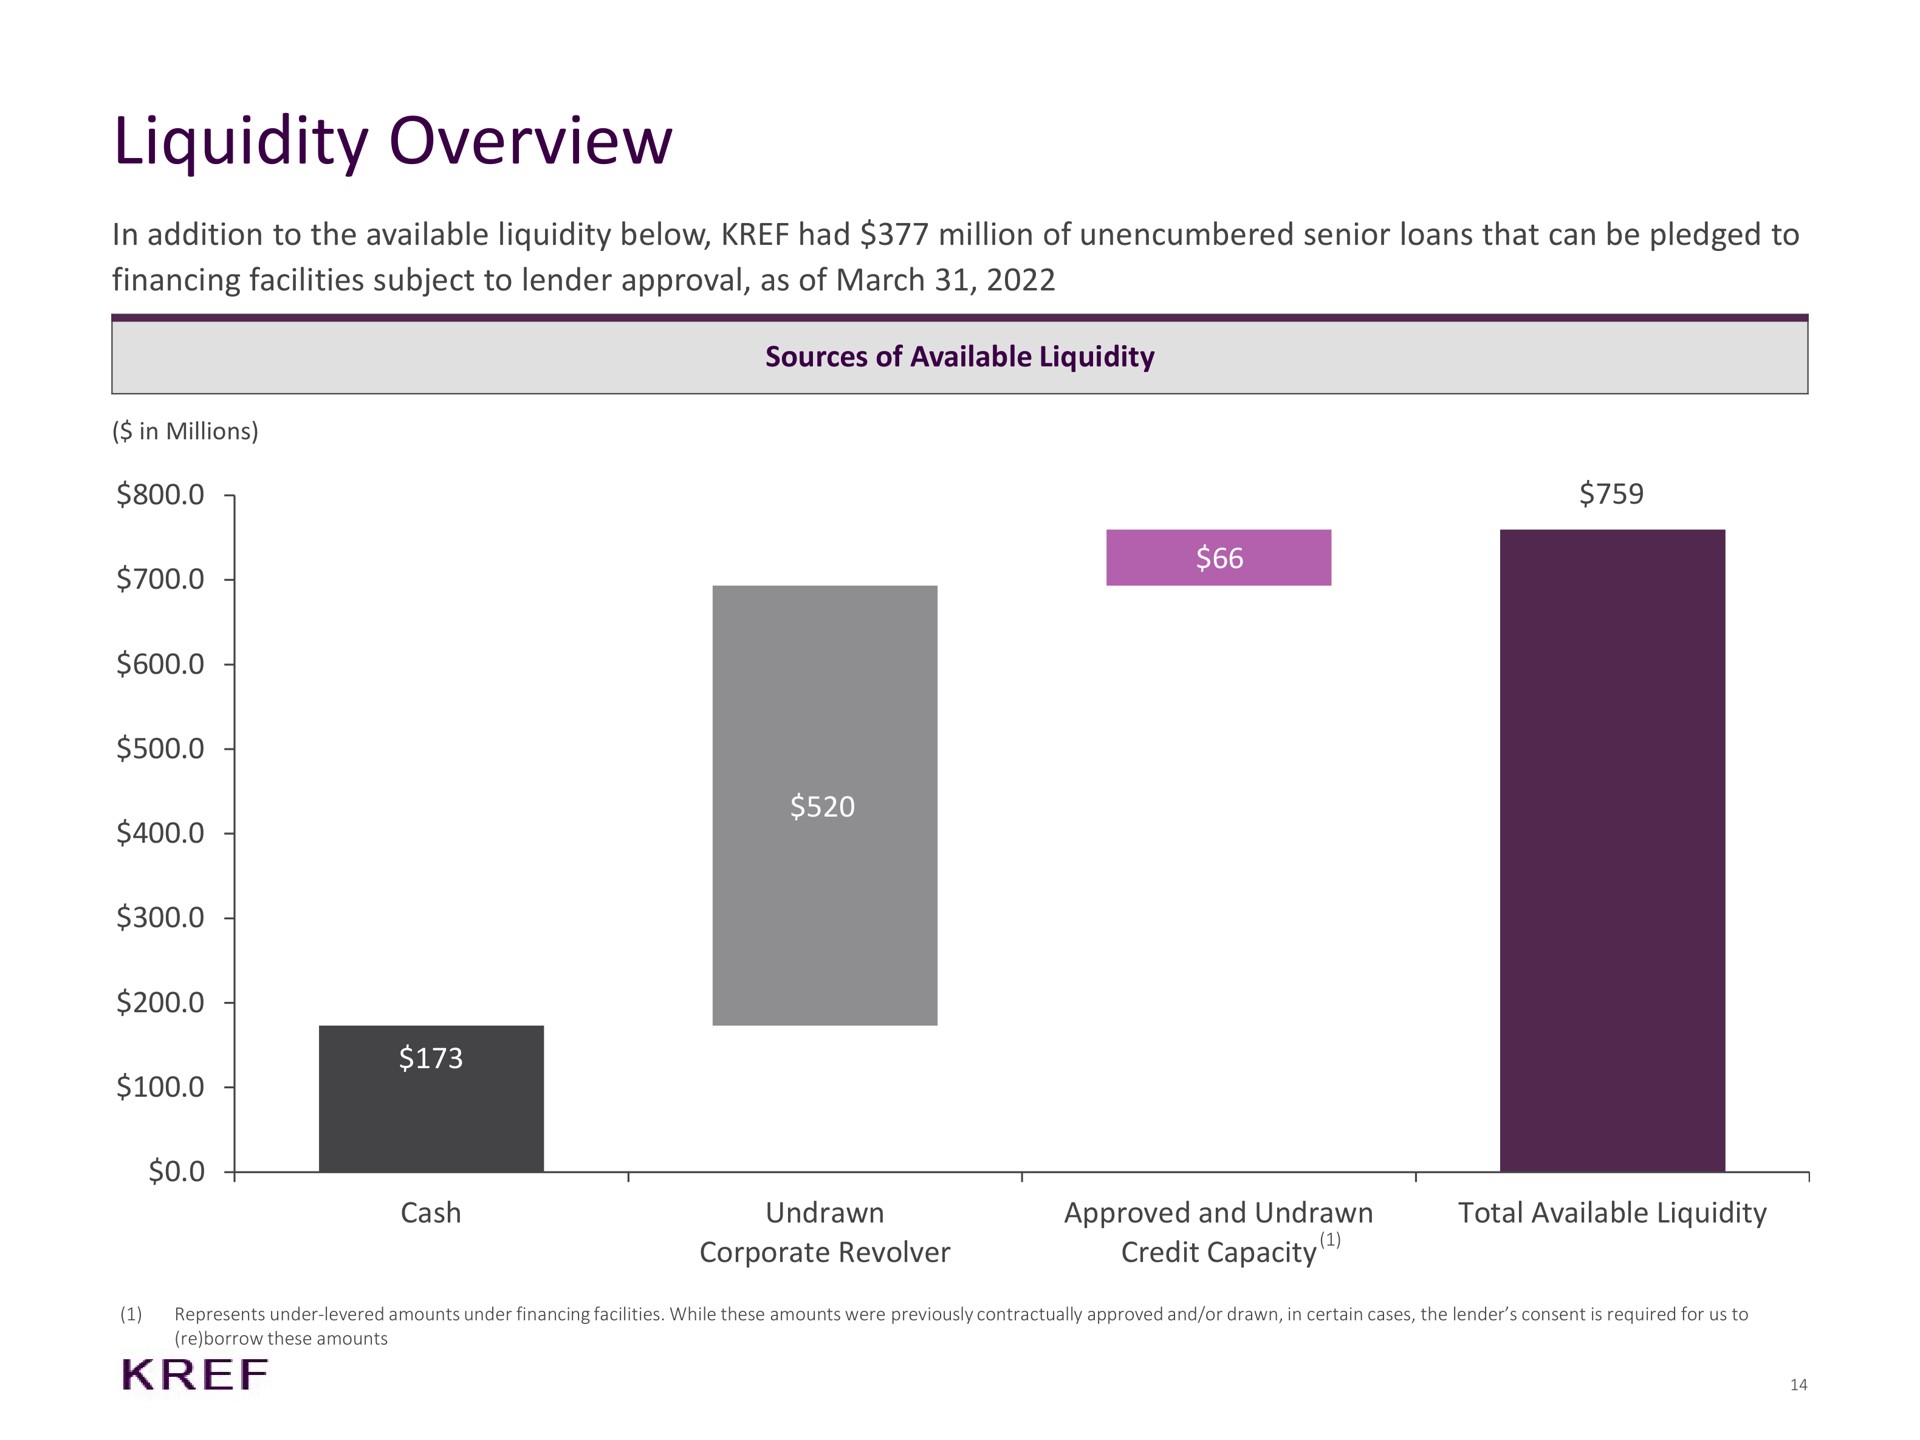 liquidity overview in addition to the available liquidity below had million of unencumbered senior loans that can be pledged to financing facilities subject to lender approval as of march sources of available liquidity cash undrawn corporate revolver approved and undrawn credit capacity total available liquidity | KKR Real Estate Finance Trust